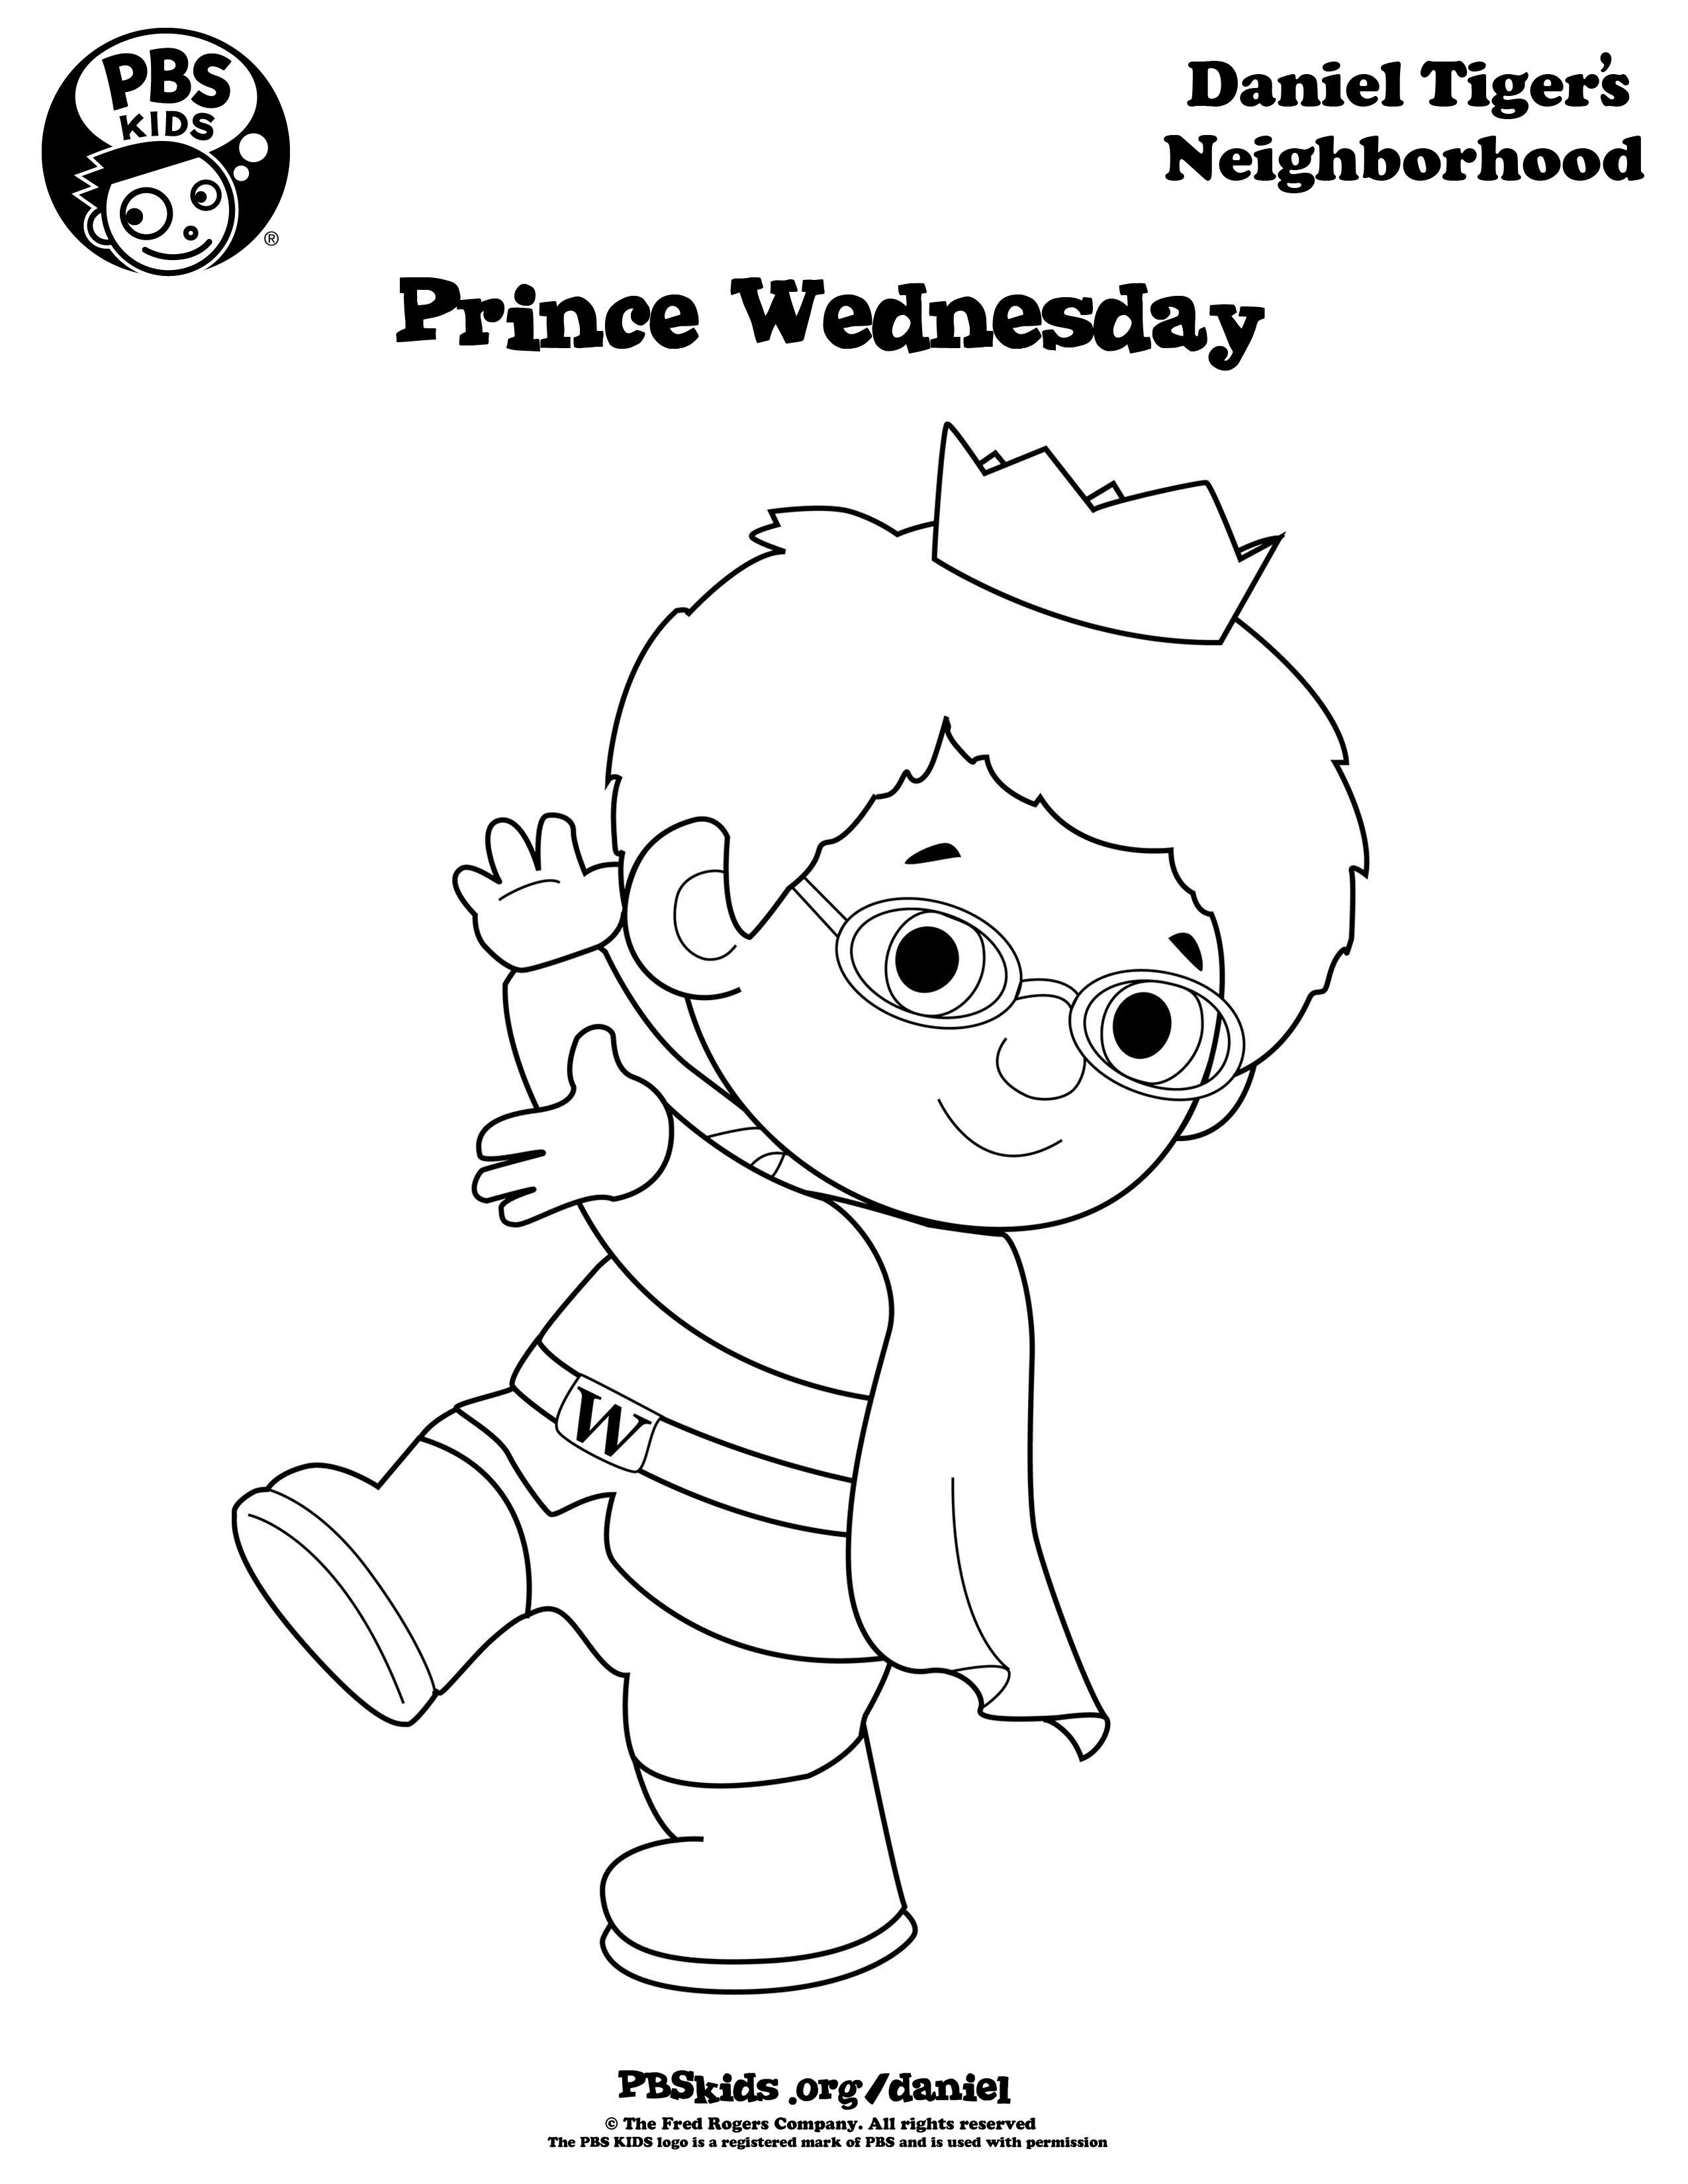 Prince Wednesday Coloring Page! #danieltiger #wqed #pbskids | Daniel - Free Printable Daniel Tiger Coloring Pages